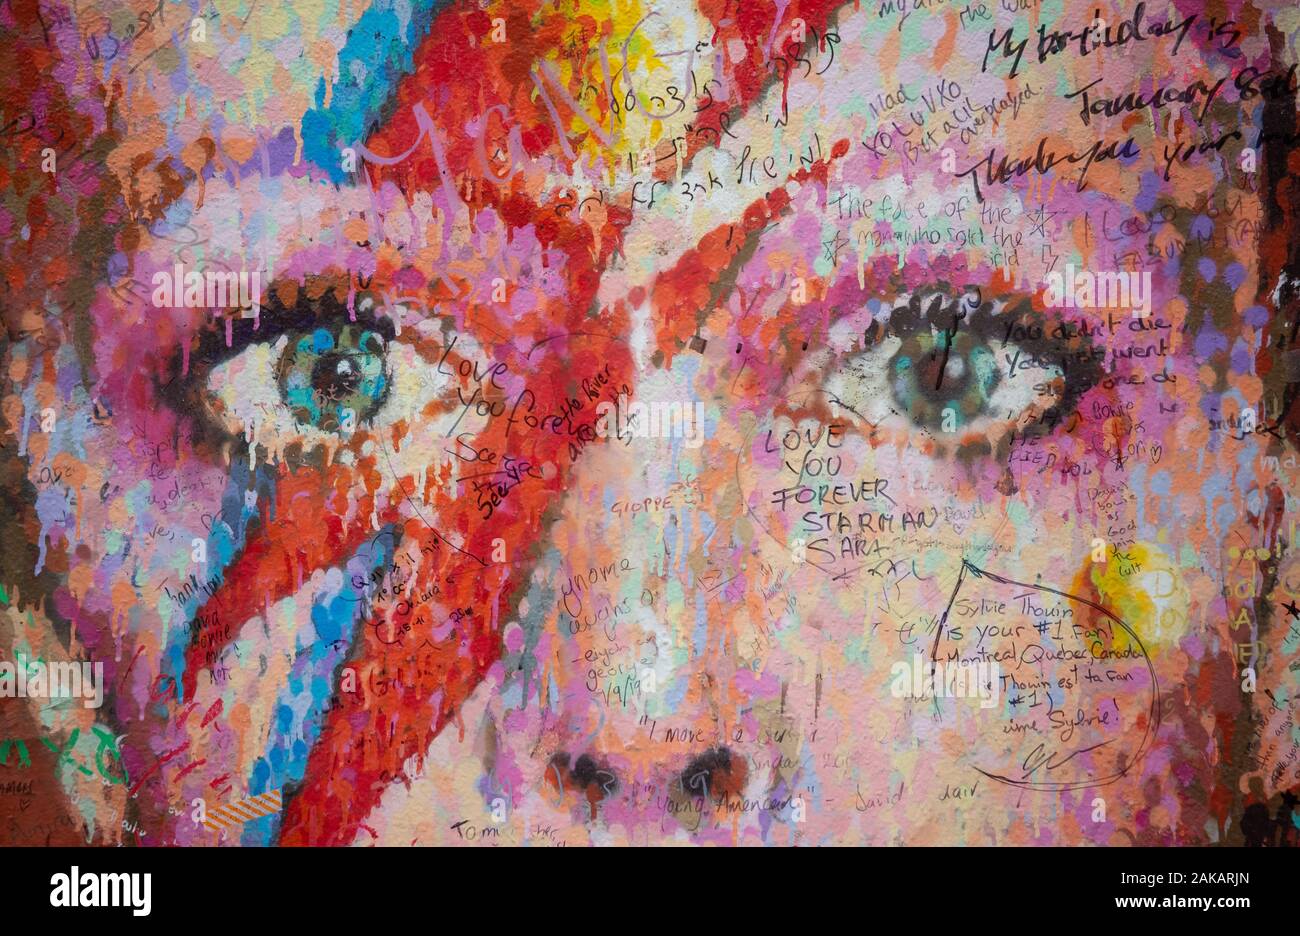 Messages written on the David Bowie mural in Brixton, south London, on what would have been the singer's 73rd birthday. Stock Photo